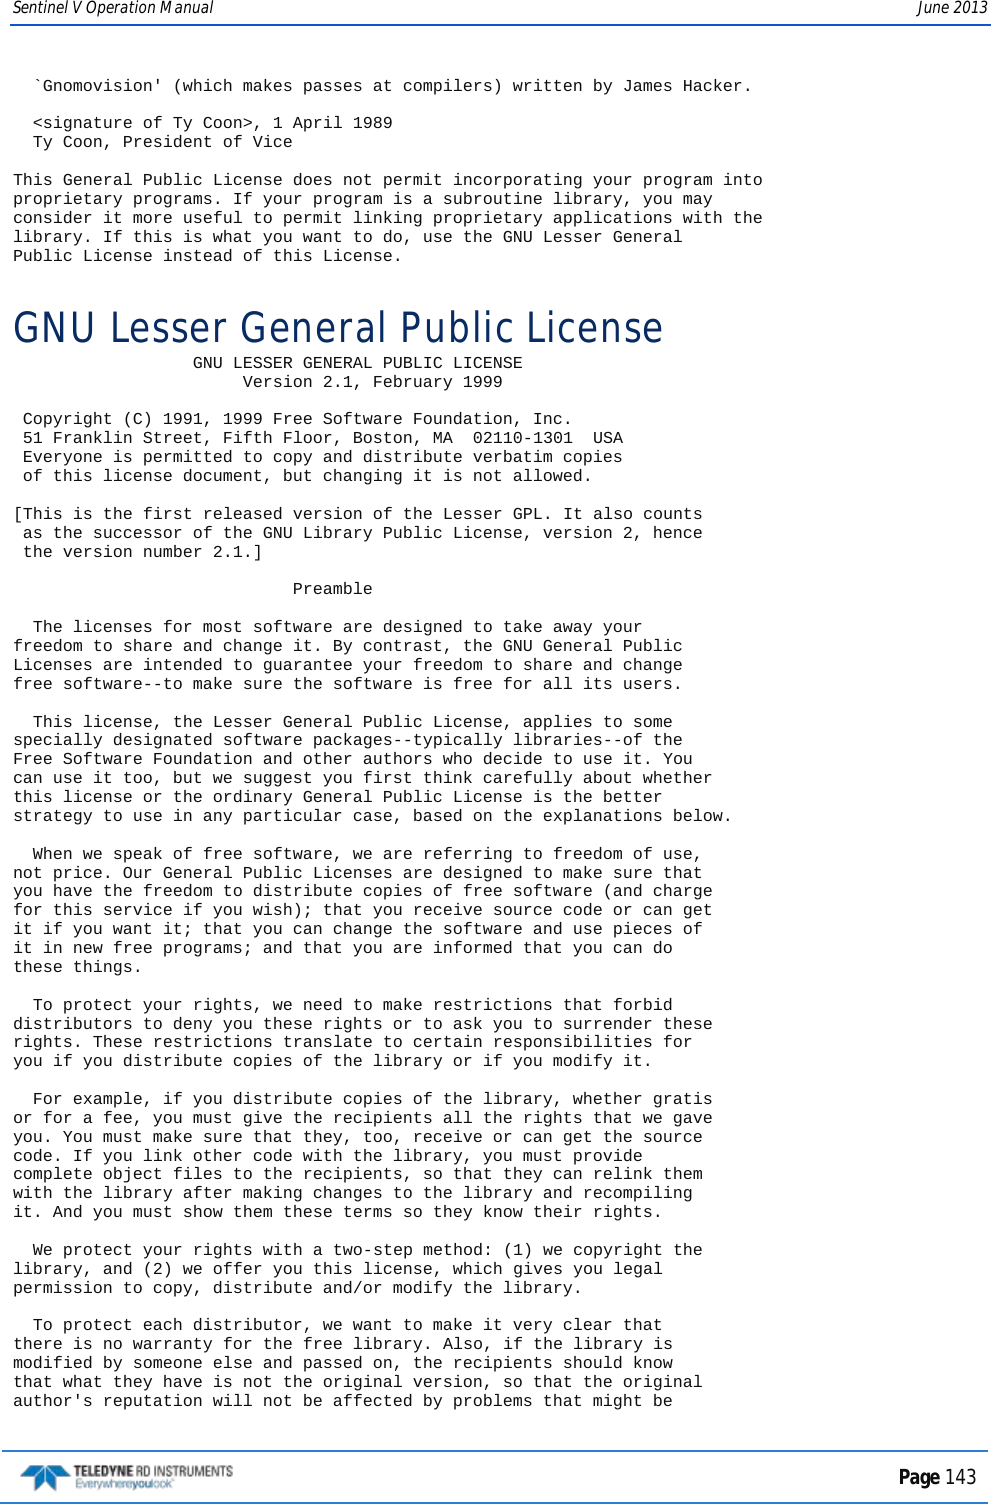 Sentinel V Operation Manual June 2013   `Gnomovision&apos; (which makes passes at compilers) written by James Hacker.    &lt;signature of Ty Coon&gt;, 1 April 1989   Ty Coon, President of Vice  This General Public License does not permit incorporating your program into proprietary programs. If your program is a subroutine library, you may consider it more useful to permit linking proprietary applications with the library. If this is what you want to do, use the GNU Lesser General Public License instead of this License. GNU Lesser General Public License                   GNU LESSER GENERAL PUBLIC LICENSE                        Version 2.1, February 1999   Copyright (C) 1991, 1999 Free Software Foundation, Inc.  51 Franklin Street, Fifth Floor, Boston, MA  02110-1301  USA  Everyone is permitted to copy and distribute verbatim copies  of this license document, but changing it is not allowed.  [This is the first released version of the Lesser GPL. It also counts  as the successor of the GNU Library Public License, version 2, hence  the version number 2.1.]                              Preamble    The licenses for most software are designed to take away your freedom to share and change it. By contrast, the GNU General Public Licenses are intended to guarantee your freedom to share and change free software--to make sure the software is free for all its users.    This license, the Lesser General Public License, applies to some specially designated software packages--typically libraries--of the Free Software Foundation and other authors who decide to use it. You can use it too, but we suggest you first think carefully about whether this license or the ordinary General Public License is the better strategy to use in any particular case, based on the explanations below.    When we speak of free software, we are referring to freedom of use, not price. Our General Public Licenses are designed to make sure that you have the freedom to distribute copies of free software (and charge for this service if you wish); that you receive source code or can get it if you want it; that you can change the software and use pieces of it in new free programs; and that you are informed that you can do these things.    To protect your rights, we need to make restrictions that forbid distributors to deny you these rights or to ask you to surrender these rights. These restrictions translate to certain responsibilities for you if you distribute copies of the library or if you modify it.    For example, if you distribute copies of the library, whether gratis or for a fee, you must give the recipients all the rights that we gave you. You must make sure that they, too, receive or can get the source code. If you link other code with the library, you must provide complete object files to the recipients, so that they can relink them with the library after making changes to the library and recompiling it. And you must show them these terms so they know their rights.    We protect your rights with a two-step method: (1) we copyright the library, and (2) we offer you this license, which gives you legal permission to copy, distribute and/or modify the library.    To protect each distributor, we want to make it very clear that there is no warranty for the free library. Also, if the library is modified by someone else and passed on, the recipients should know that what they have is not the original version, so that the original author&apos;s reputation will not be affected by problems that might be  Page 143  